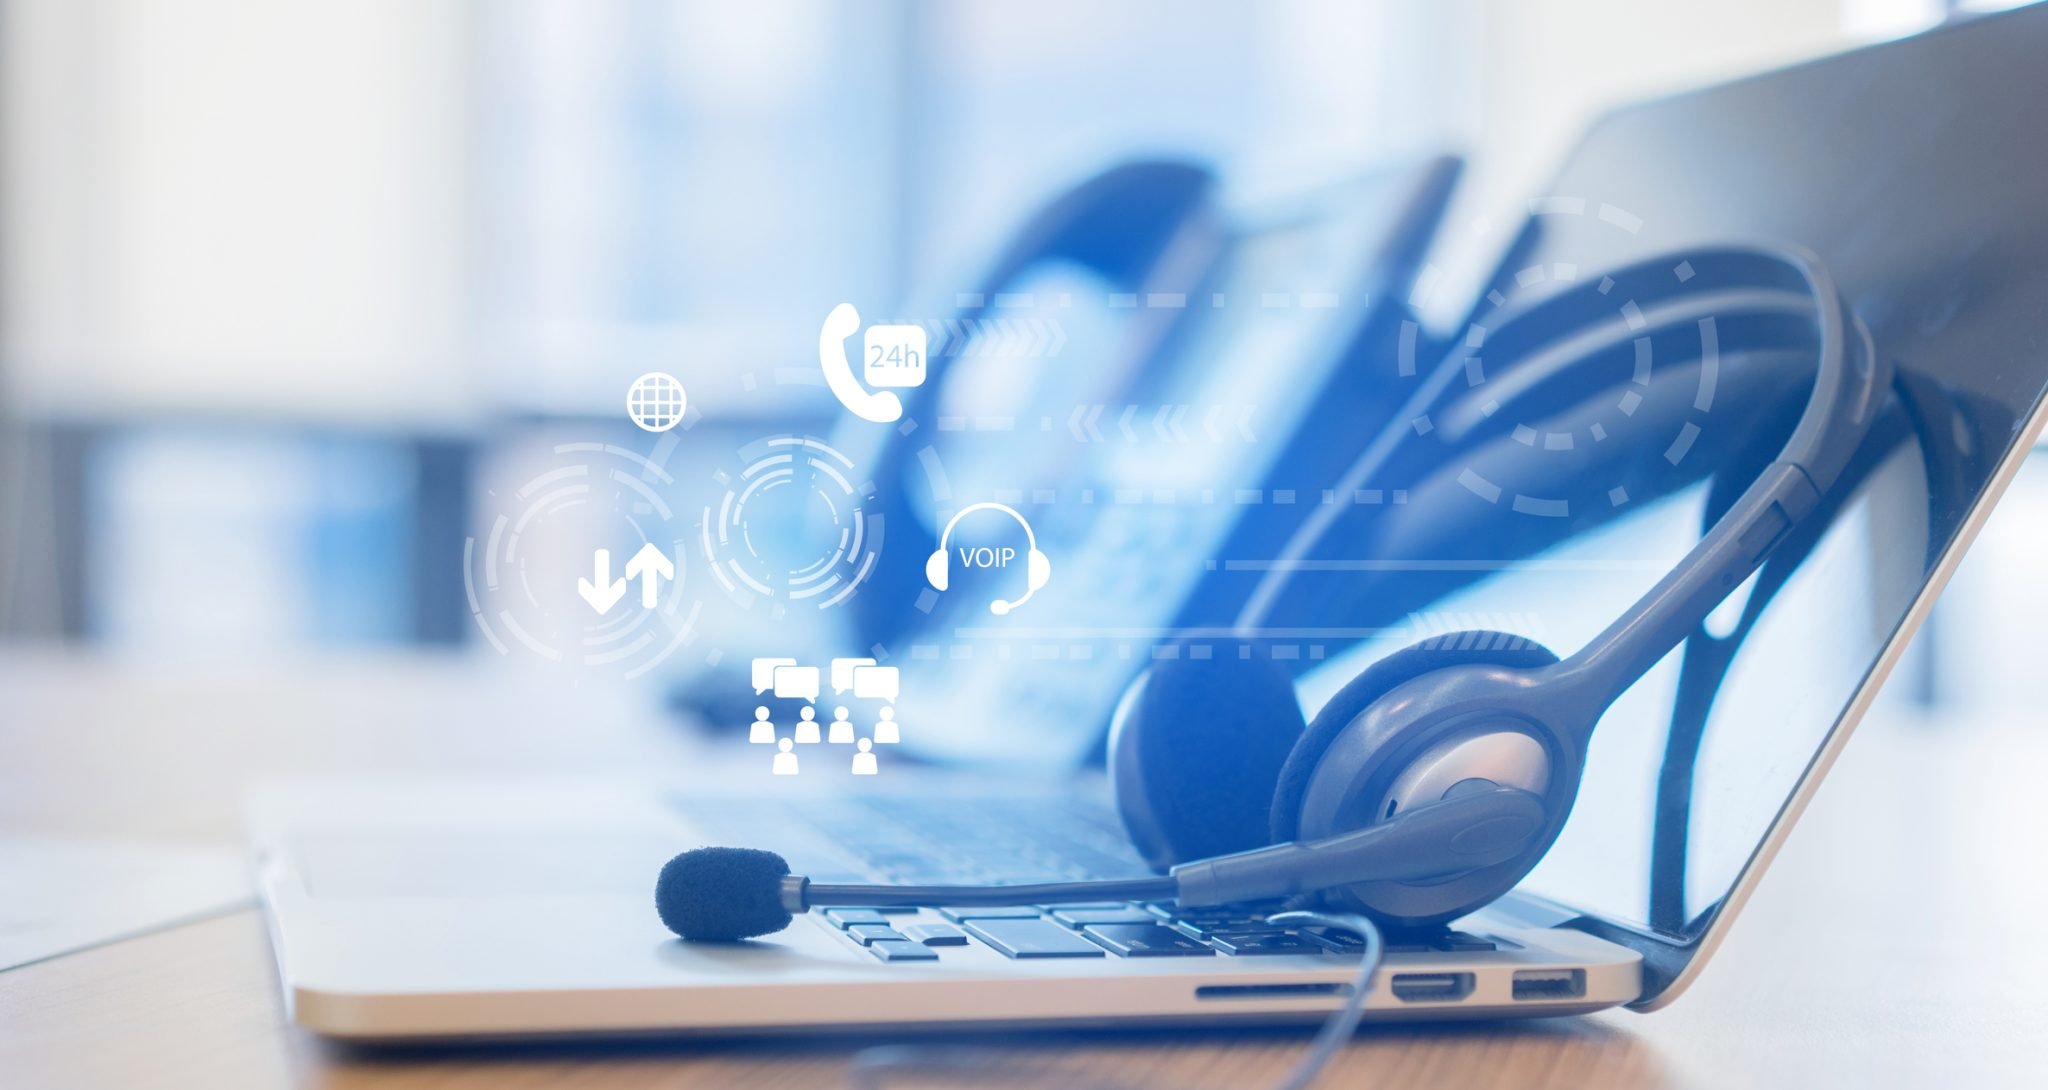 New trends in the cloud call center that are redefining customer support system